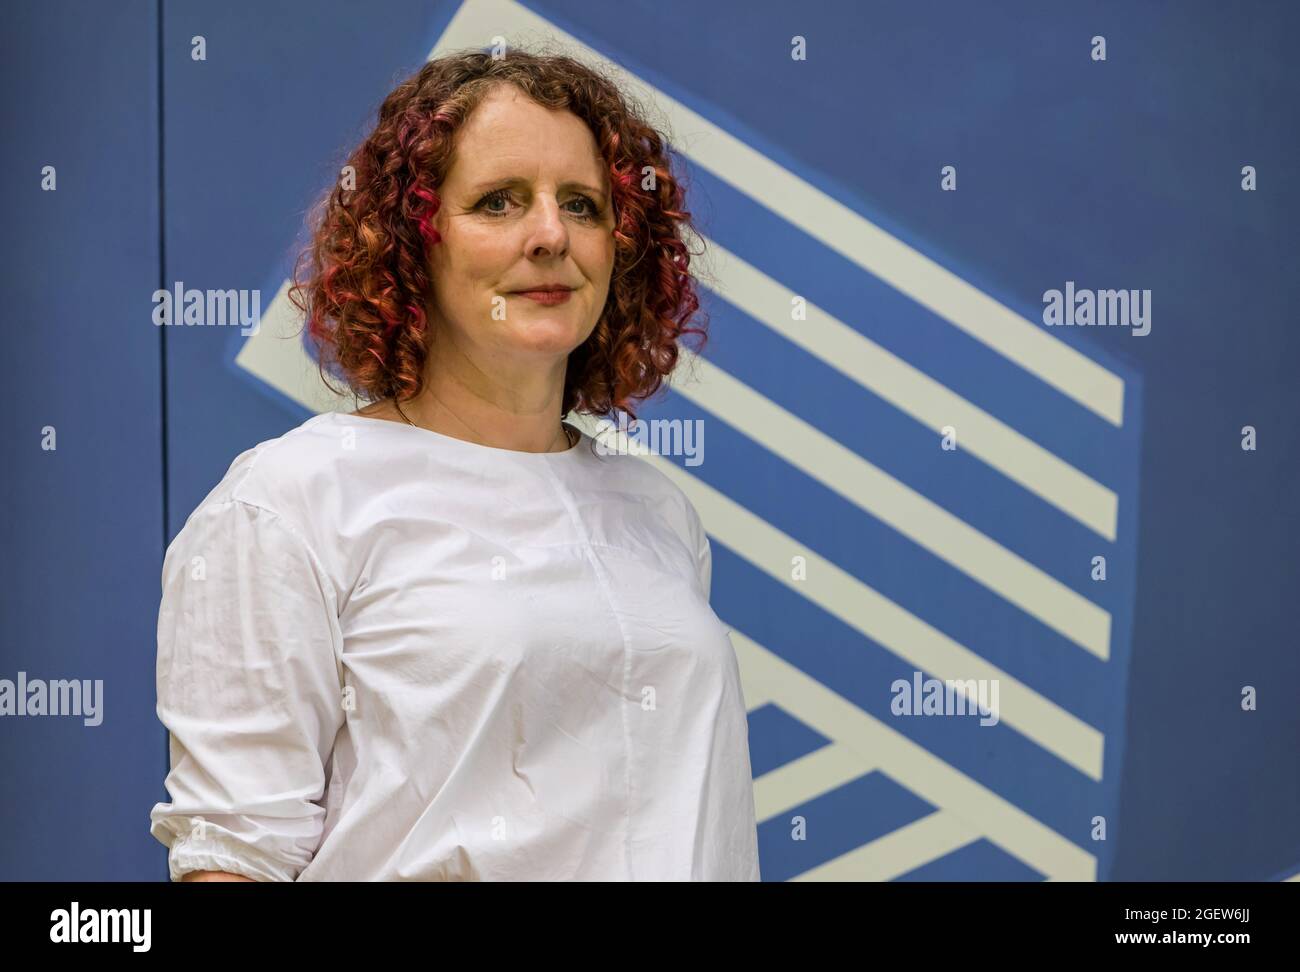 Edinburgh, Scotland, UK, 21 August 2021. Edinburgh International Book Festival: Pictured: Edinburgh-based author Maggie O’Farrell is at the book festival today talking about her novel ’Hamnet’ which was winner of the Women’s Prize for Fiction Stock Photo